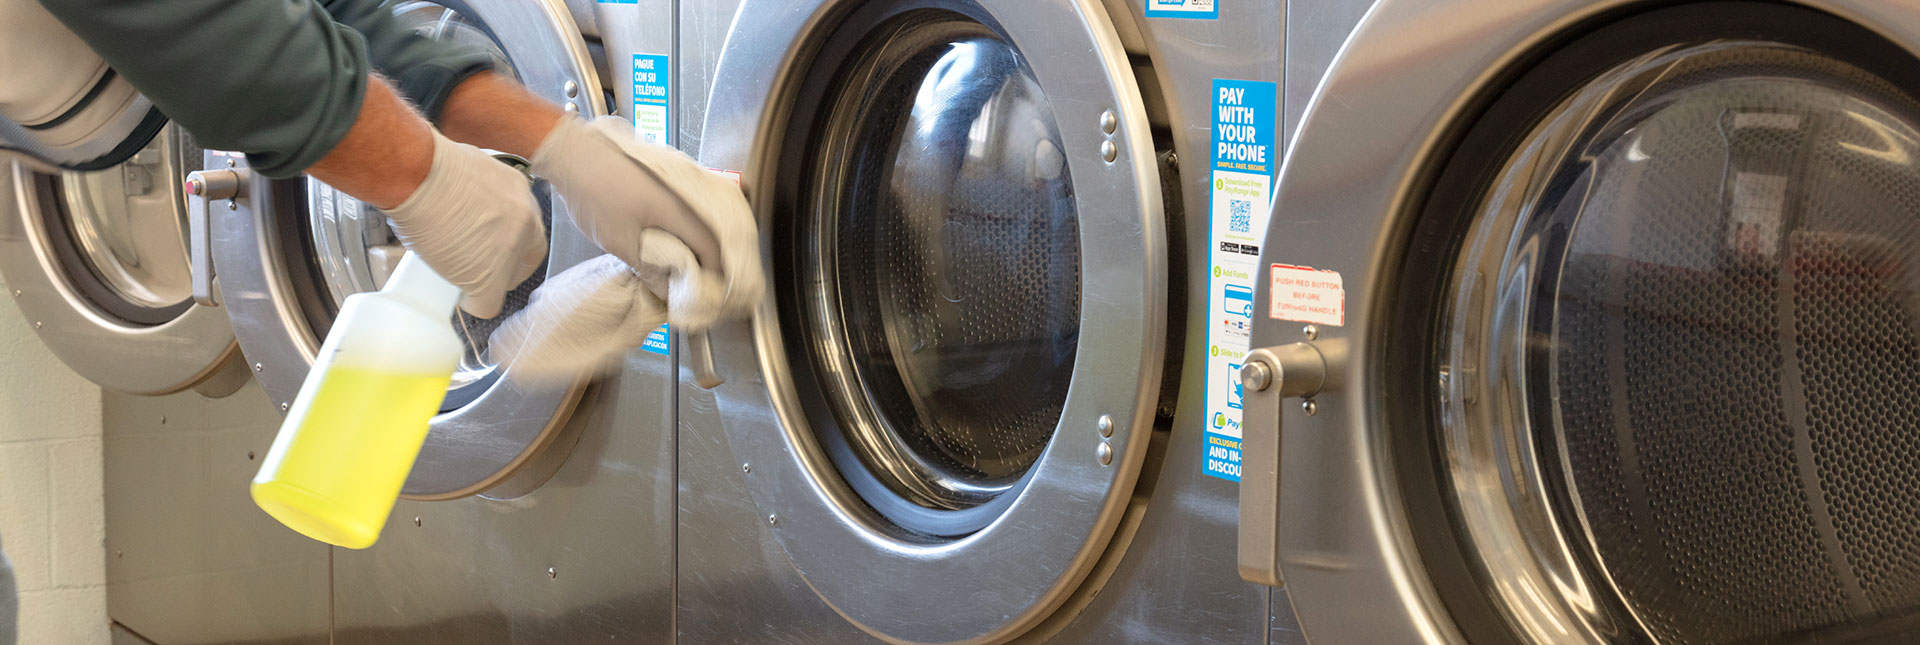 clean laundromat - always clean - friendly staff - self service laundry - The Laundromat by Swish & Swirl